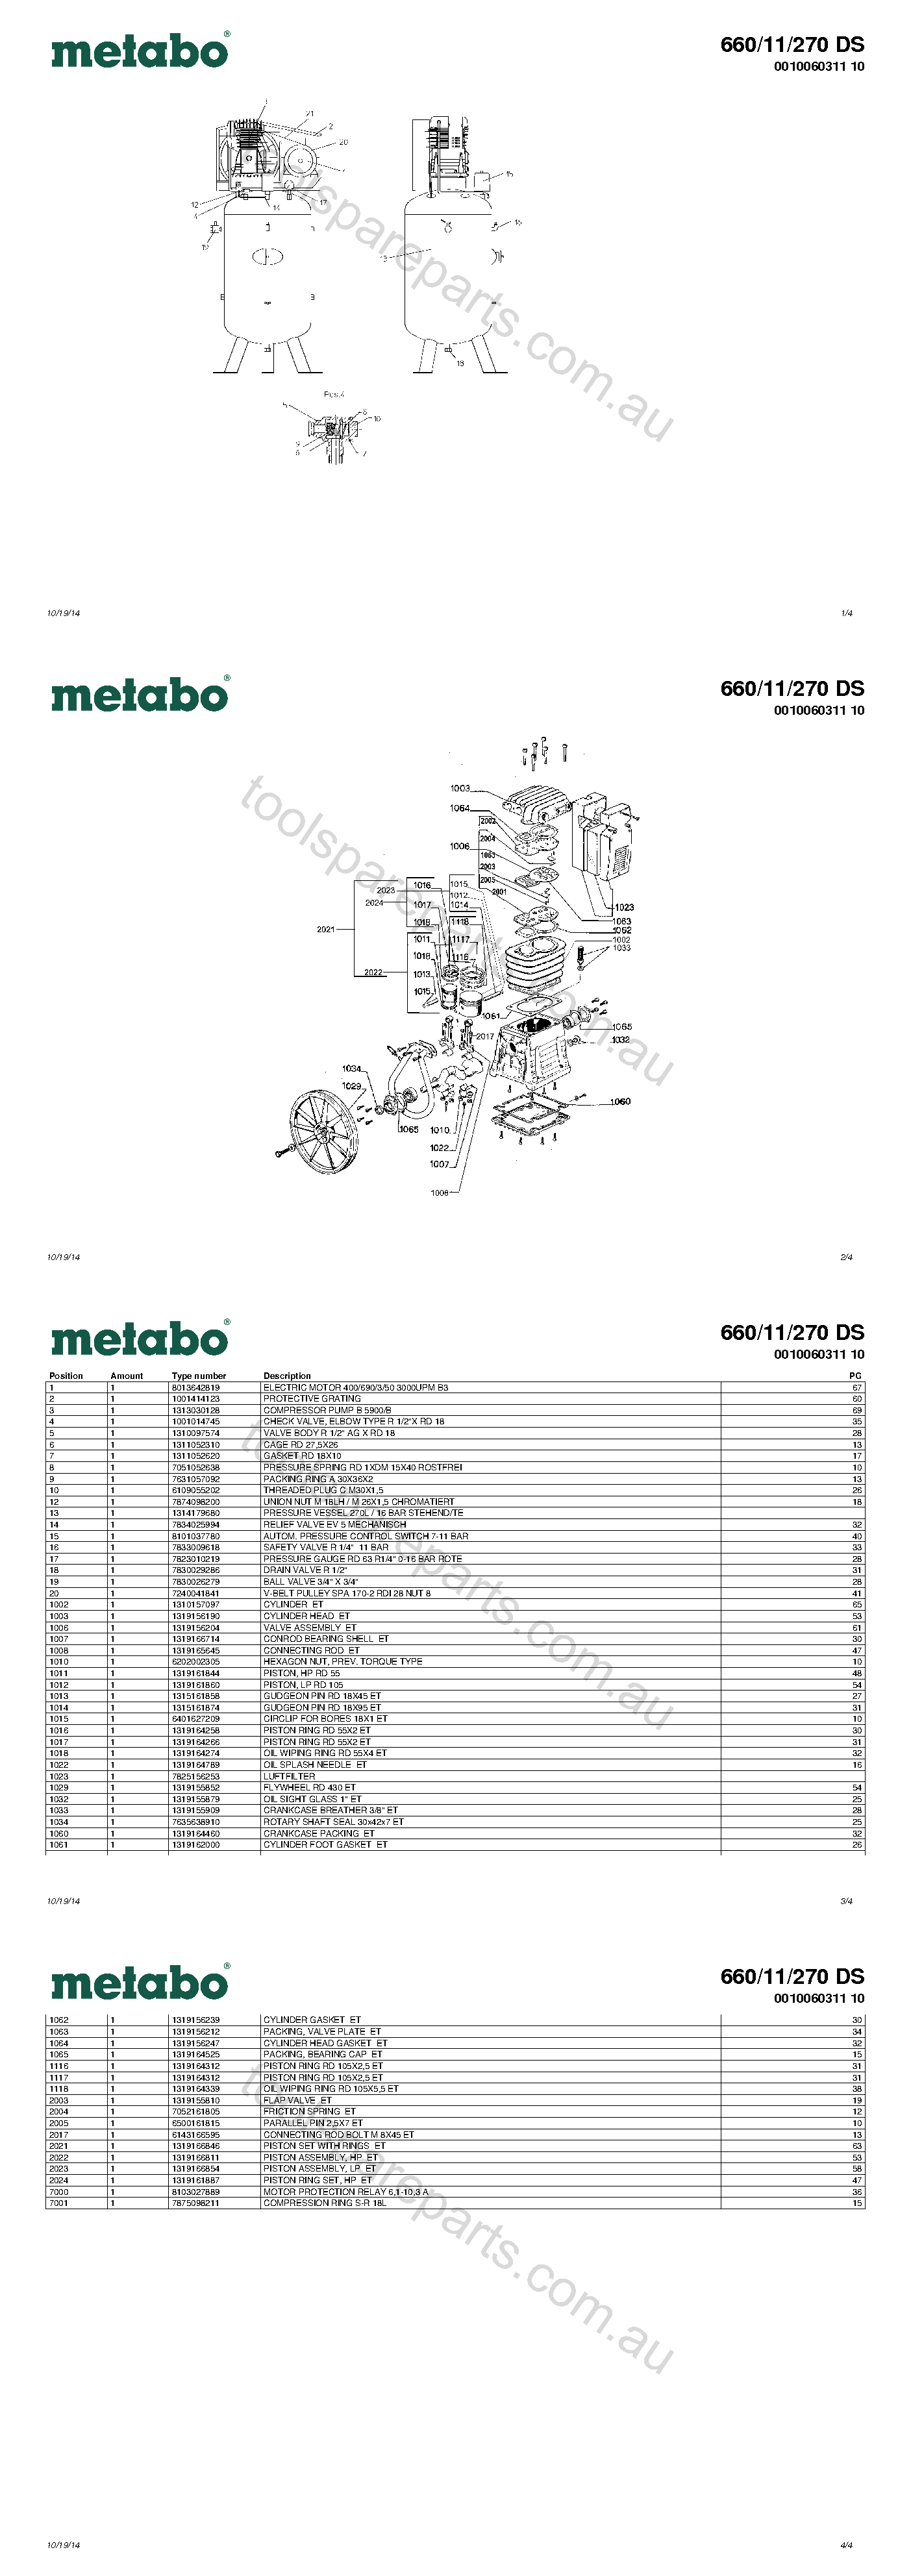 Metabo 660/11/270 DS 0010060311 10  Diagram 1